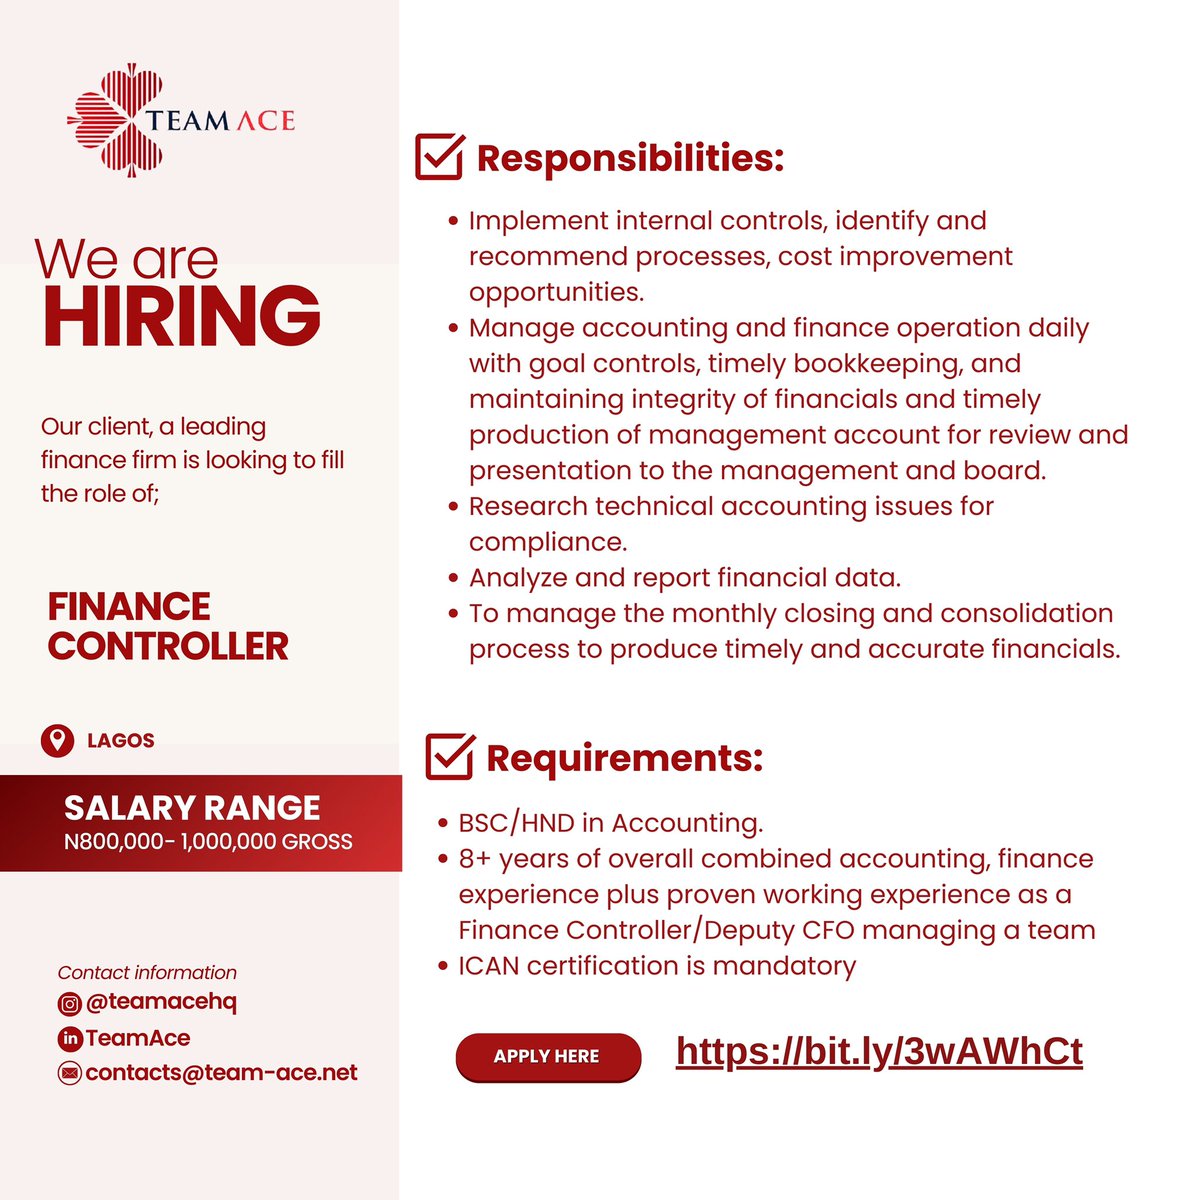 Job Opening! See flier for details Interested and qualified? Apply here👇🏽 bit.ly/3wAWhCt #financecontroller #hiring #hiringnow #jobopening #recruiting #teamace #Tapswap